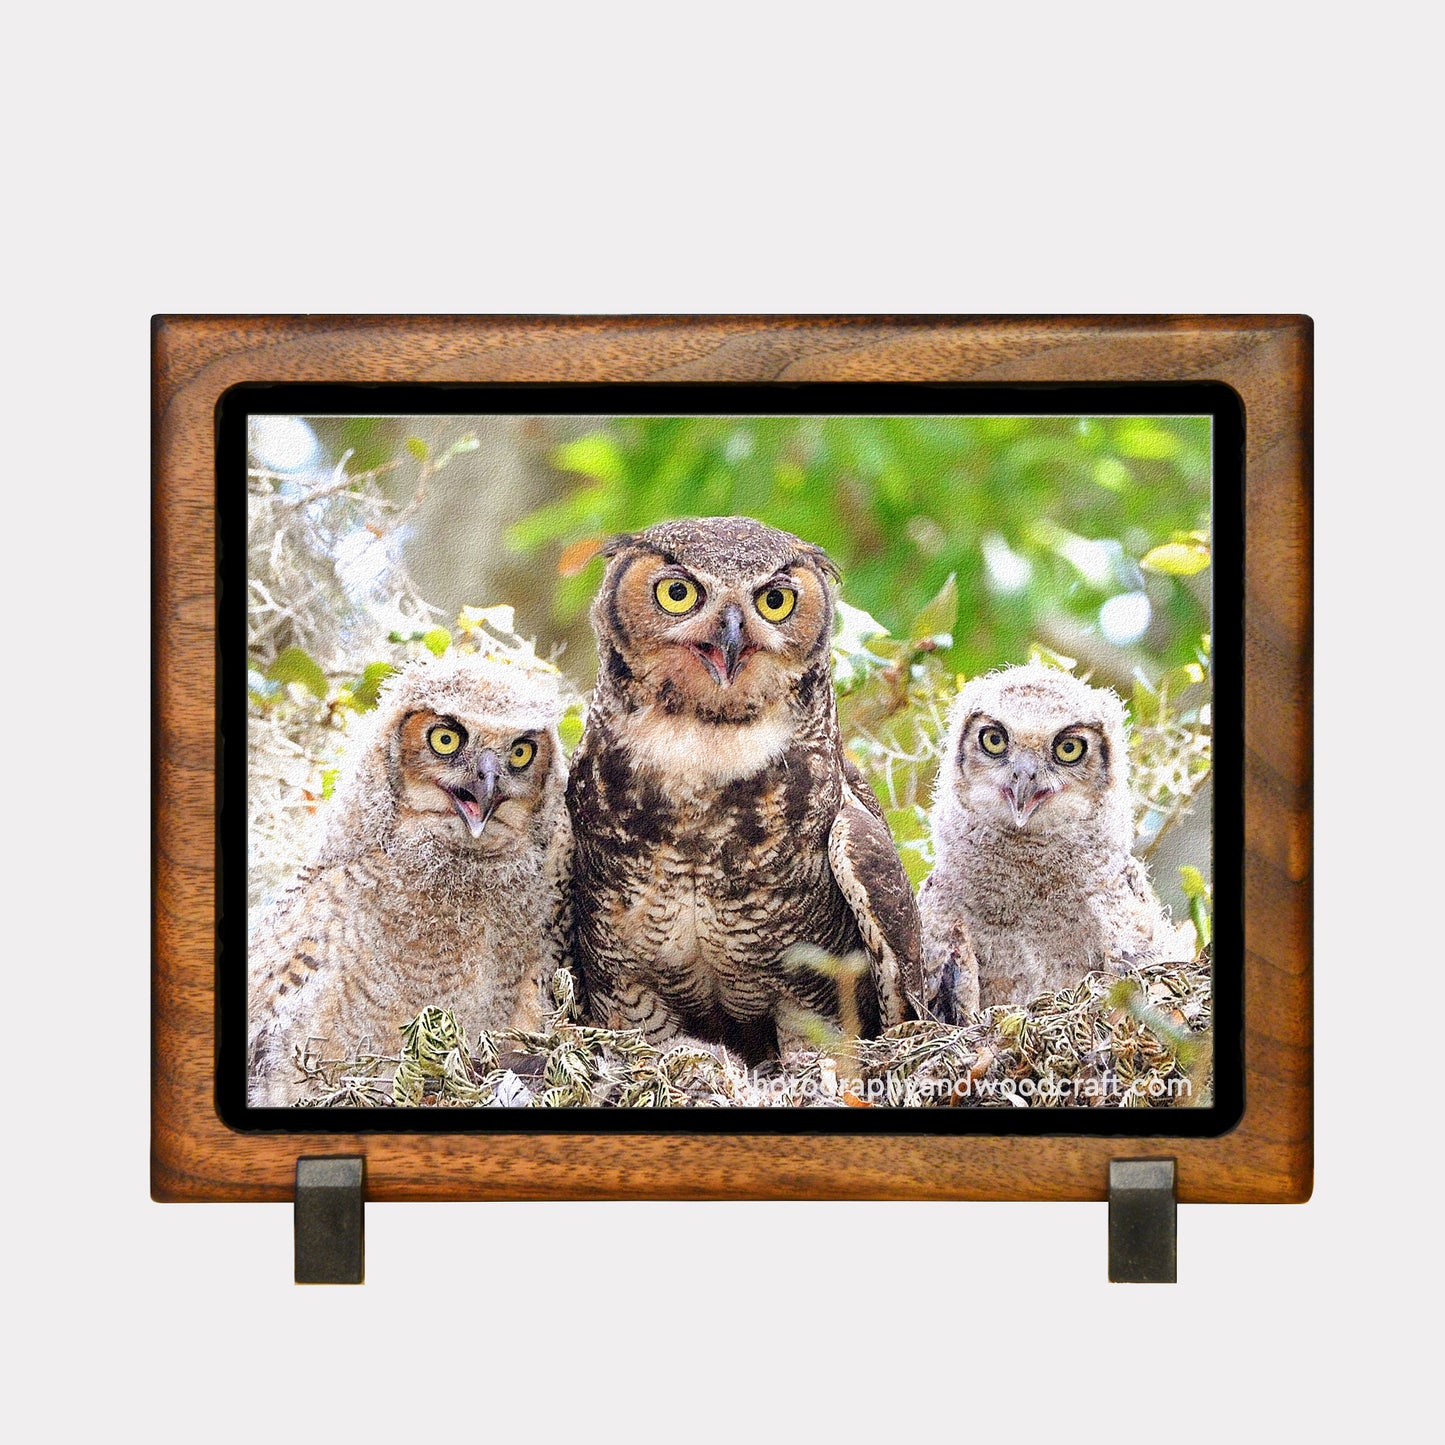 5" x 7" Owl family. Canvas Print in Solid Wood Floating Frame